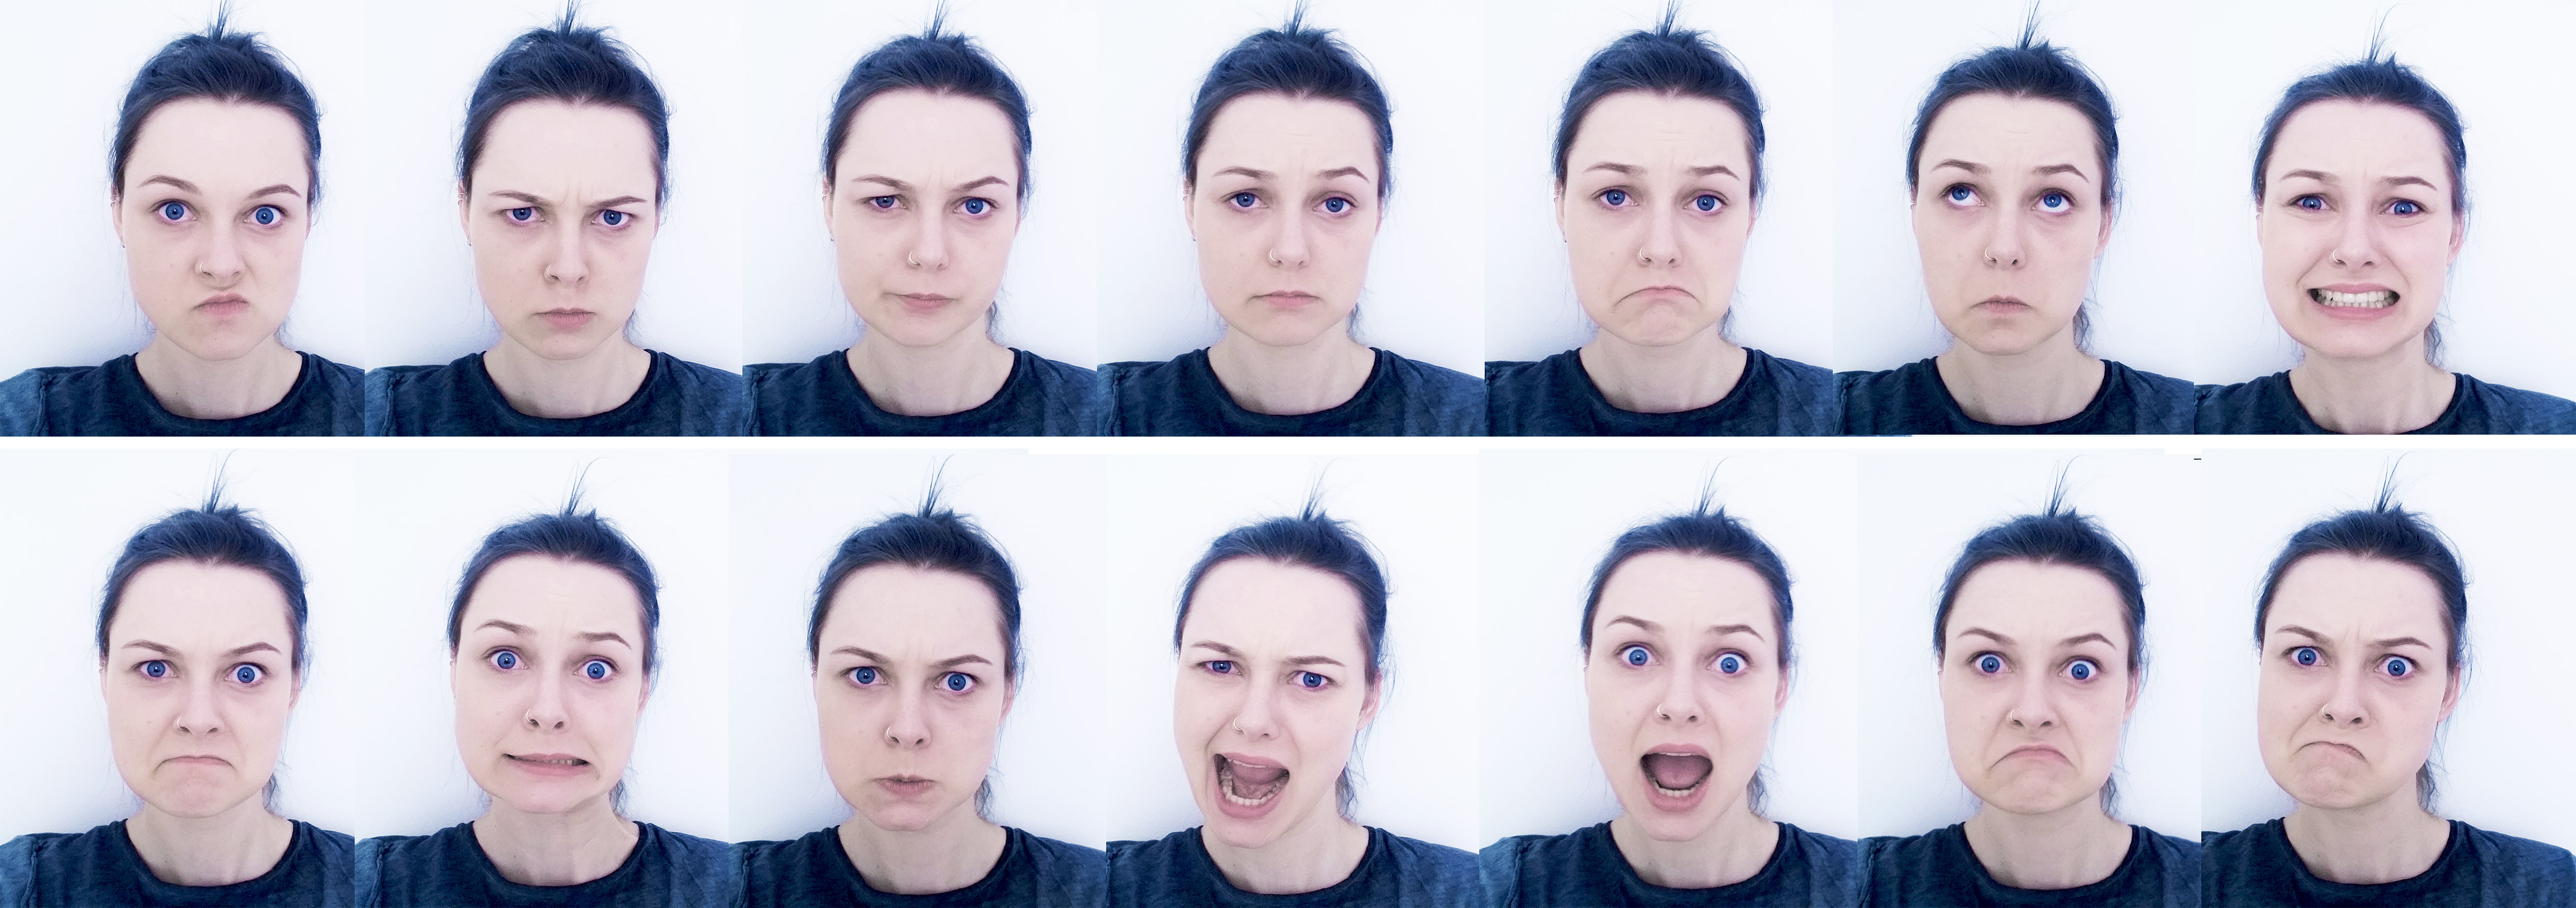 FACE expression sheet III